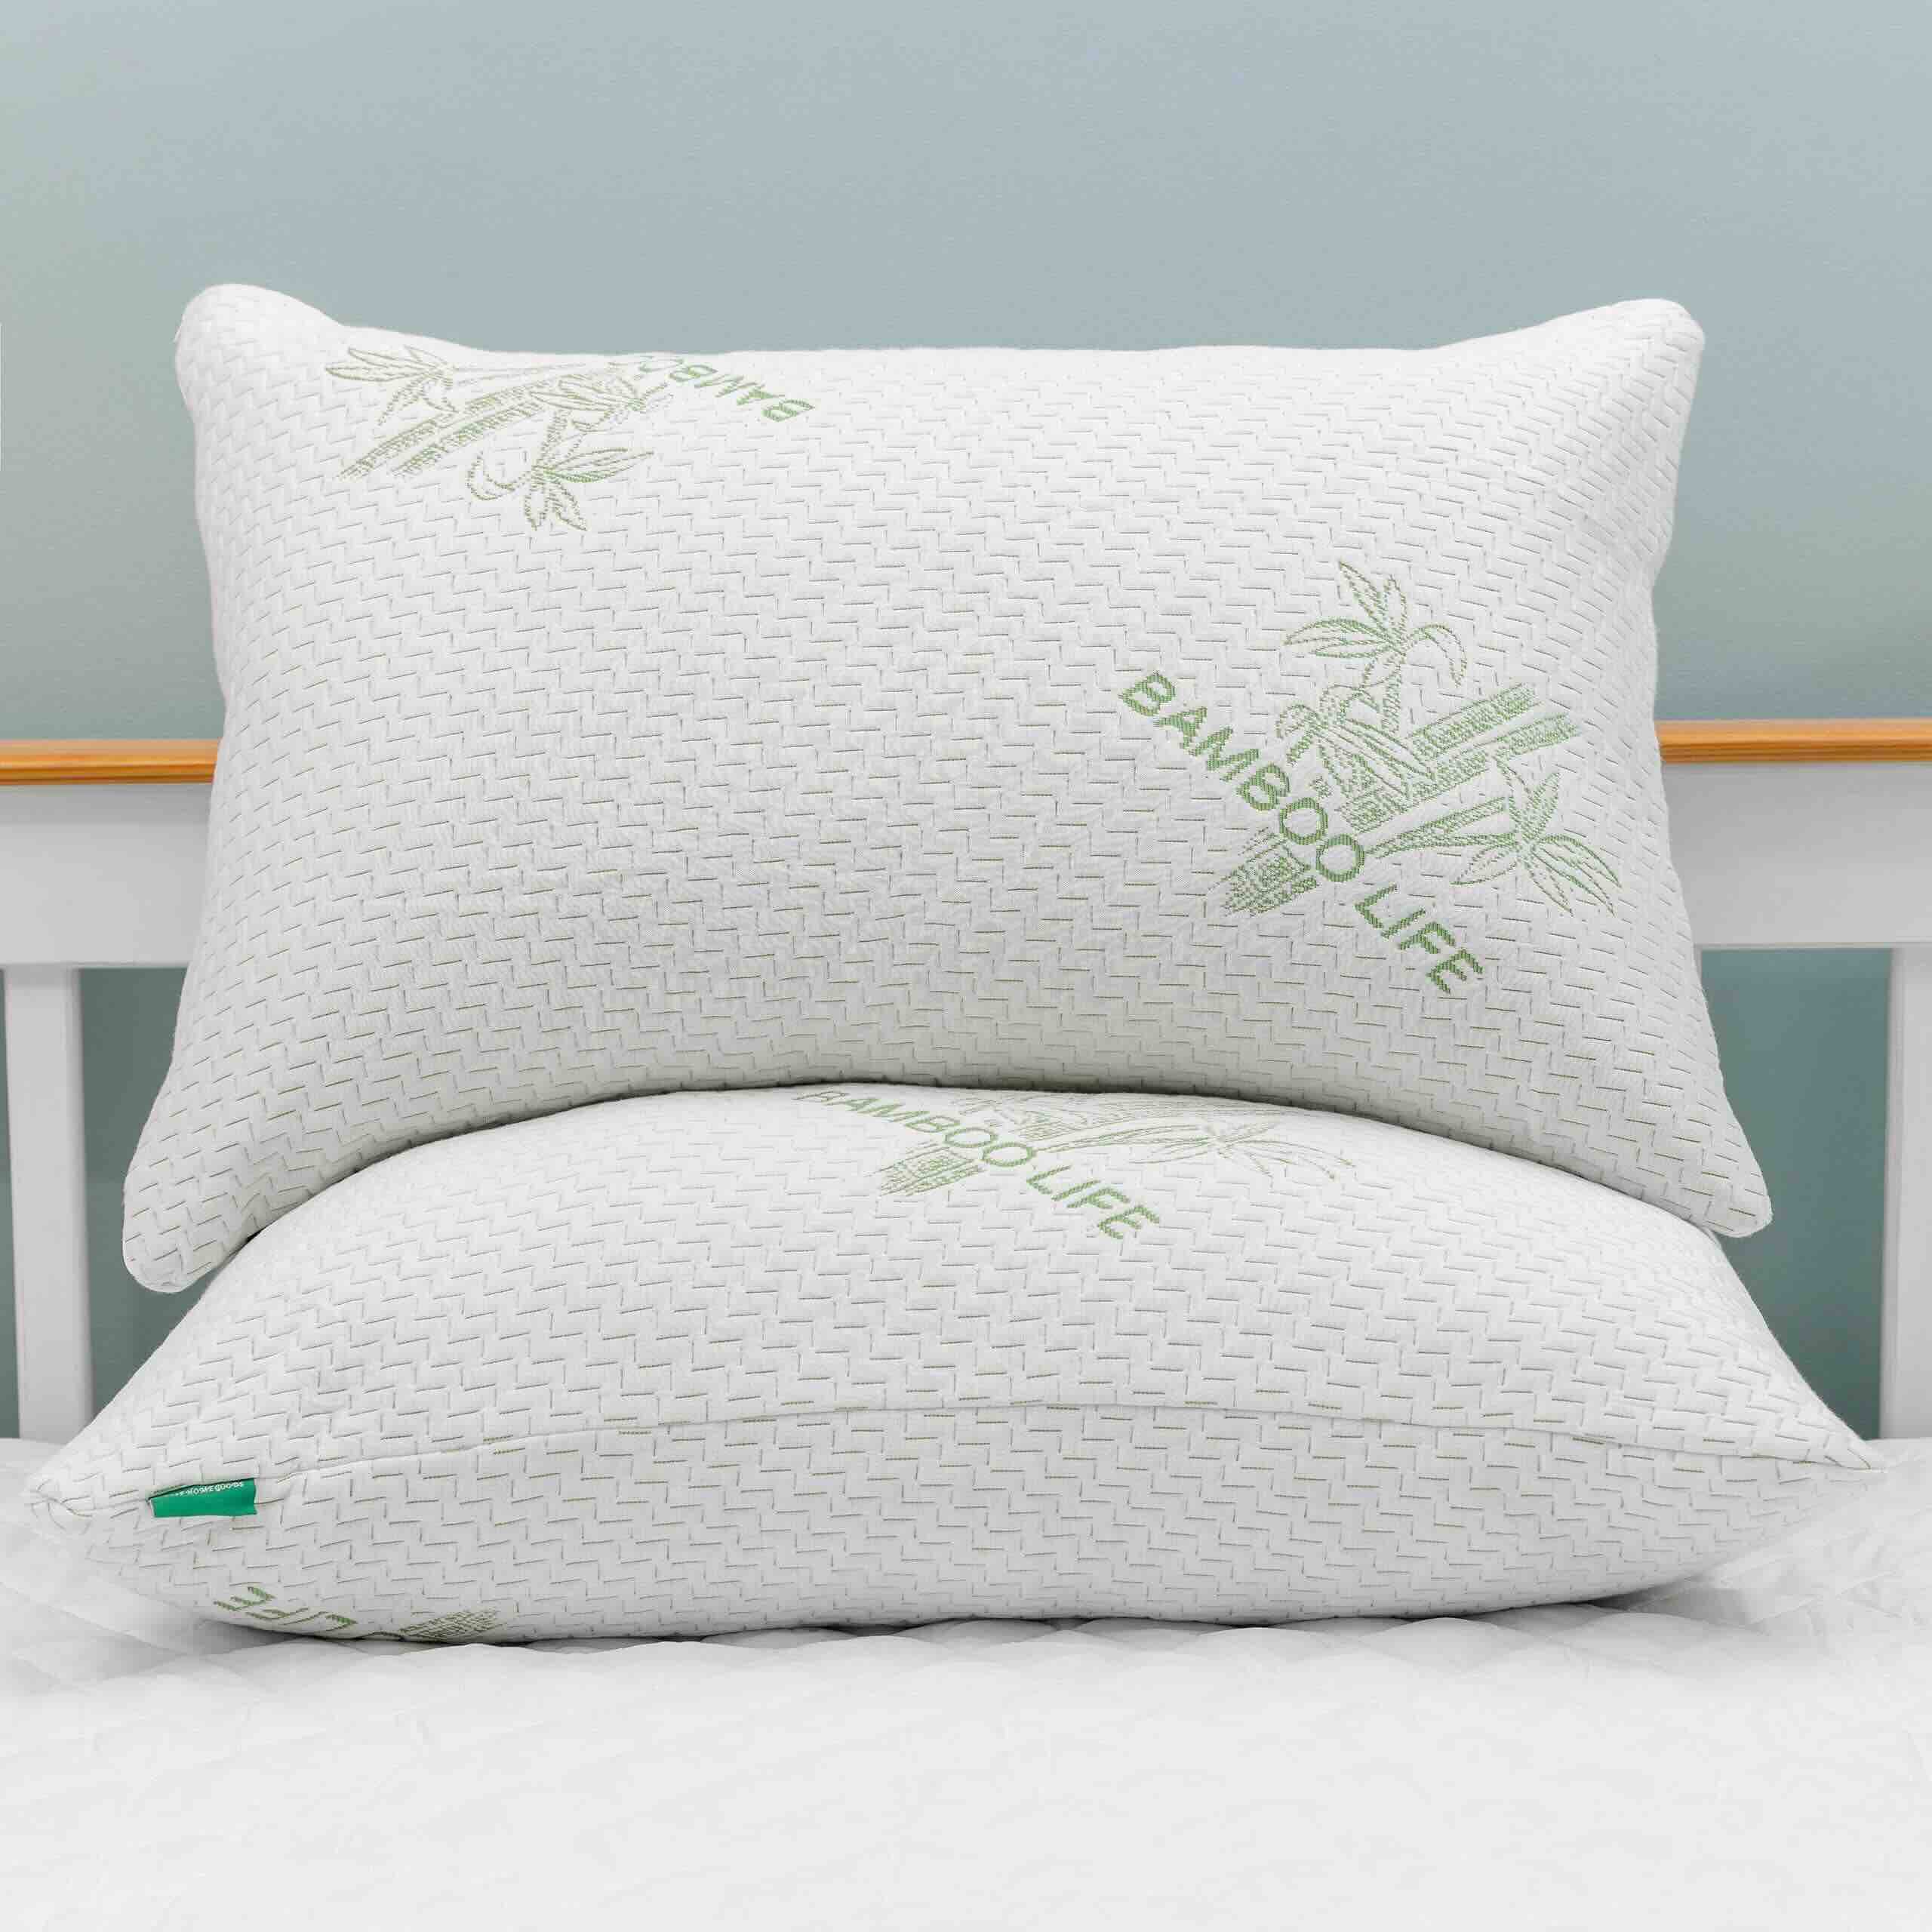 What Are Bamboo Pillows Good For